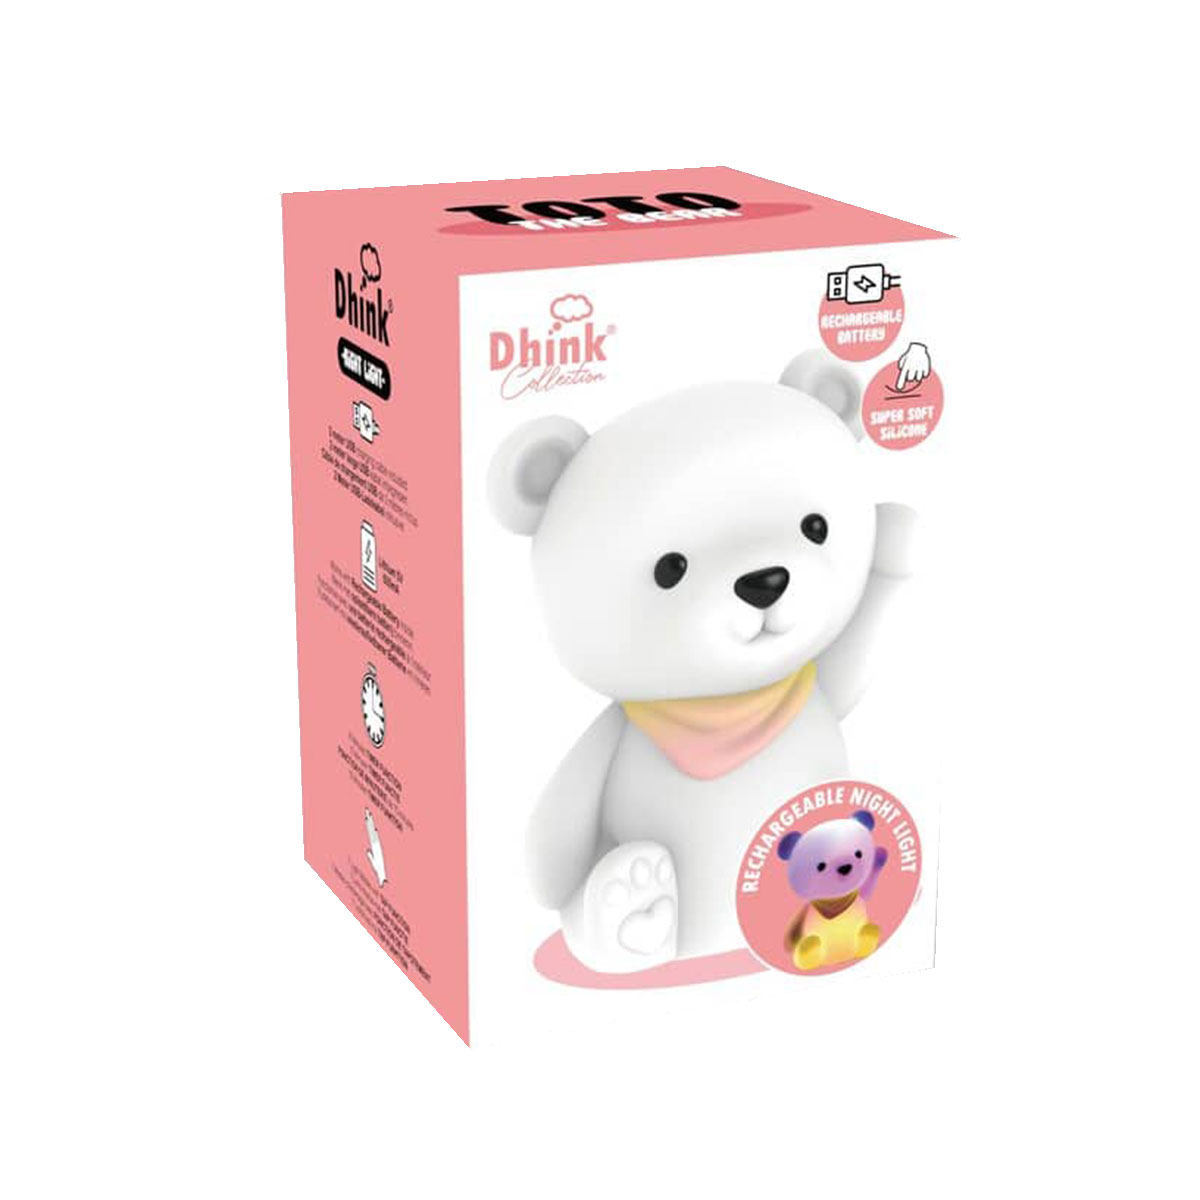 Soft rechargeable silicone night light - bear